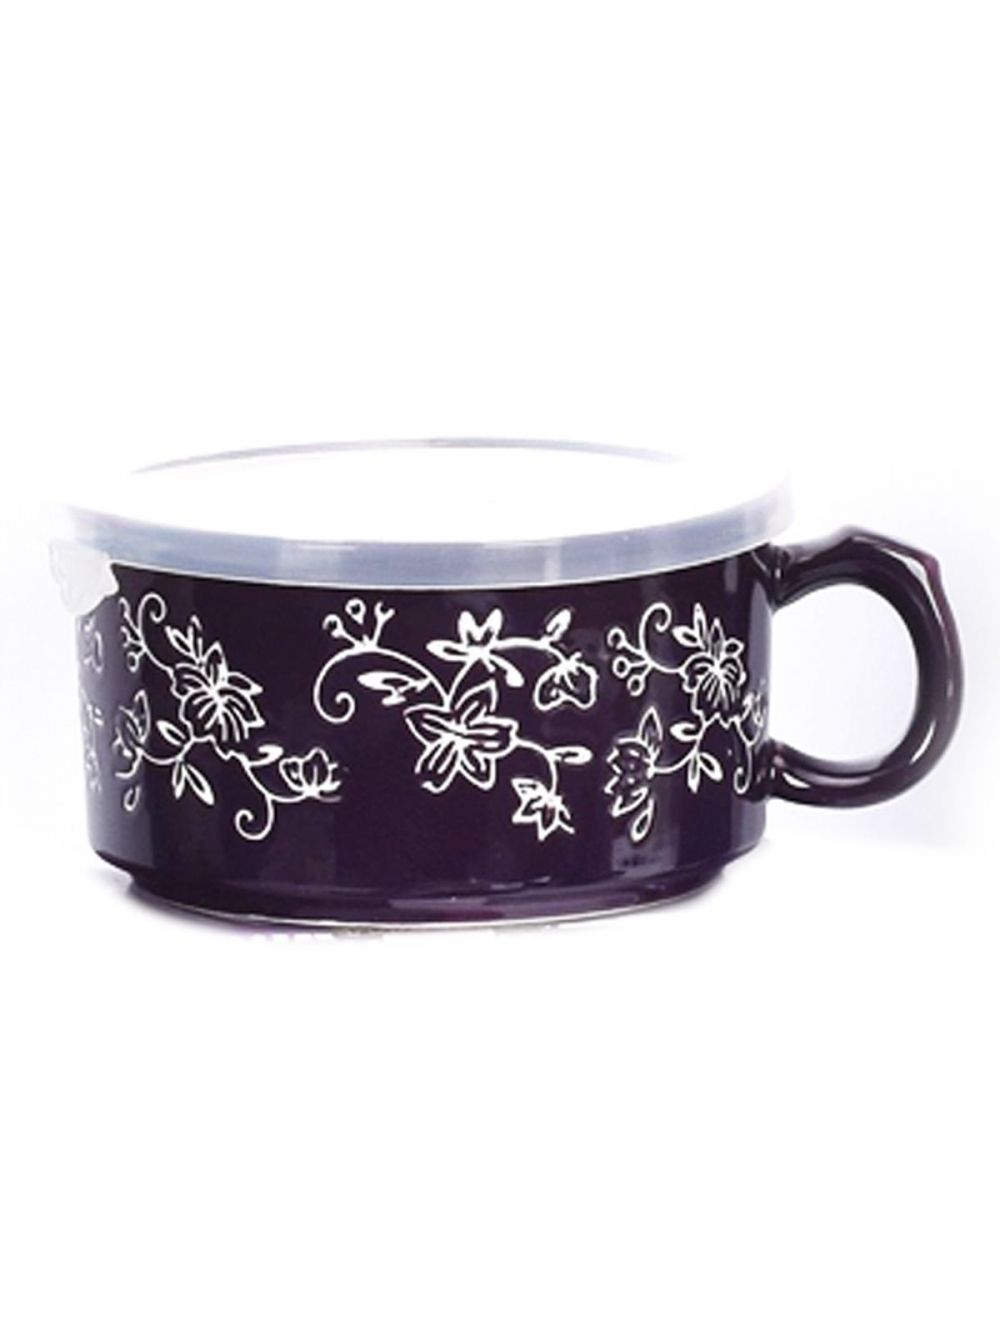 Temp-tations Floral Lace Meal Mug with Gift Box -K50664-039-01